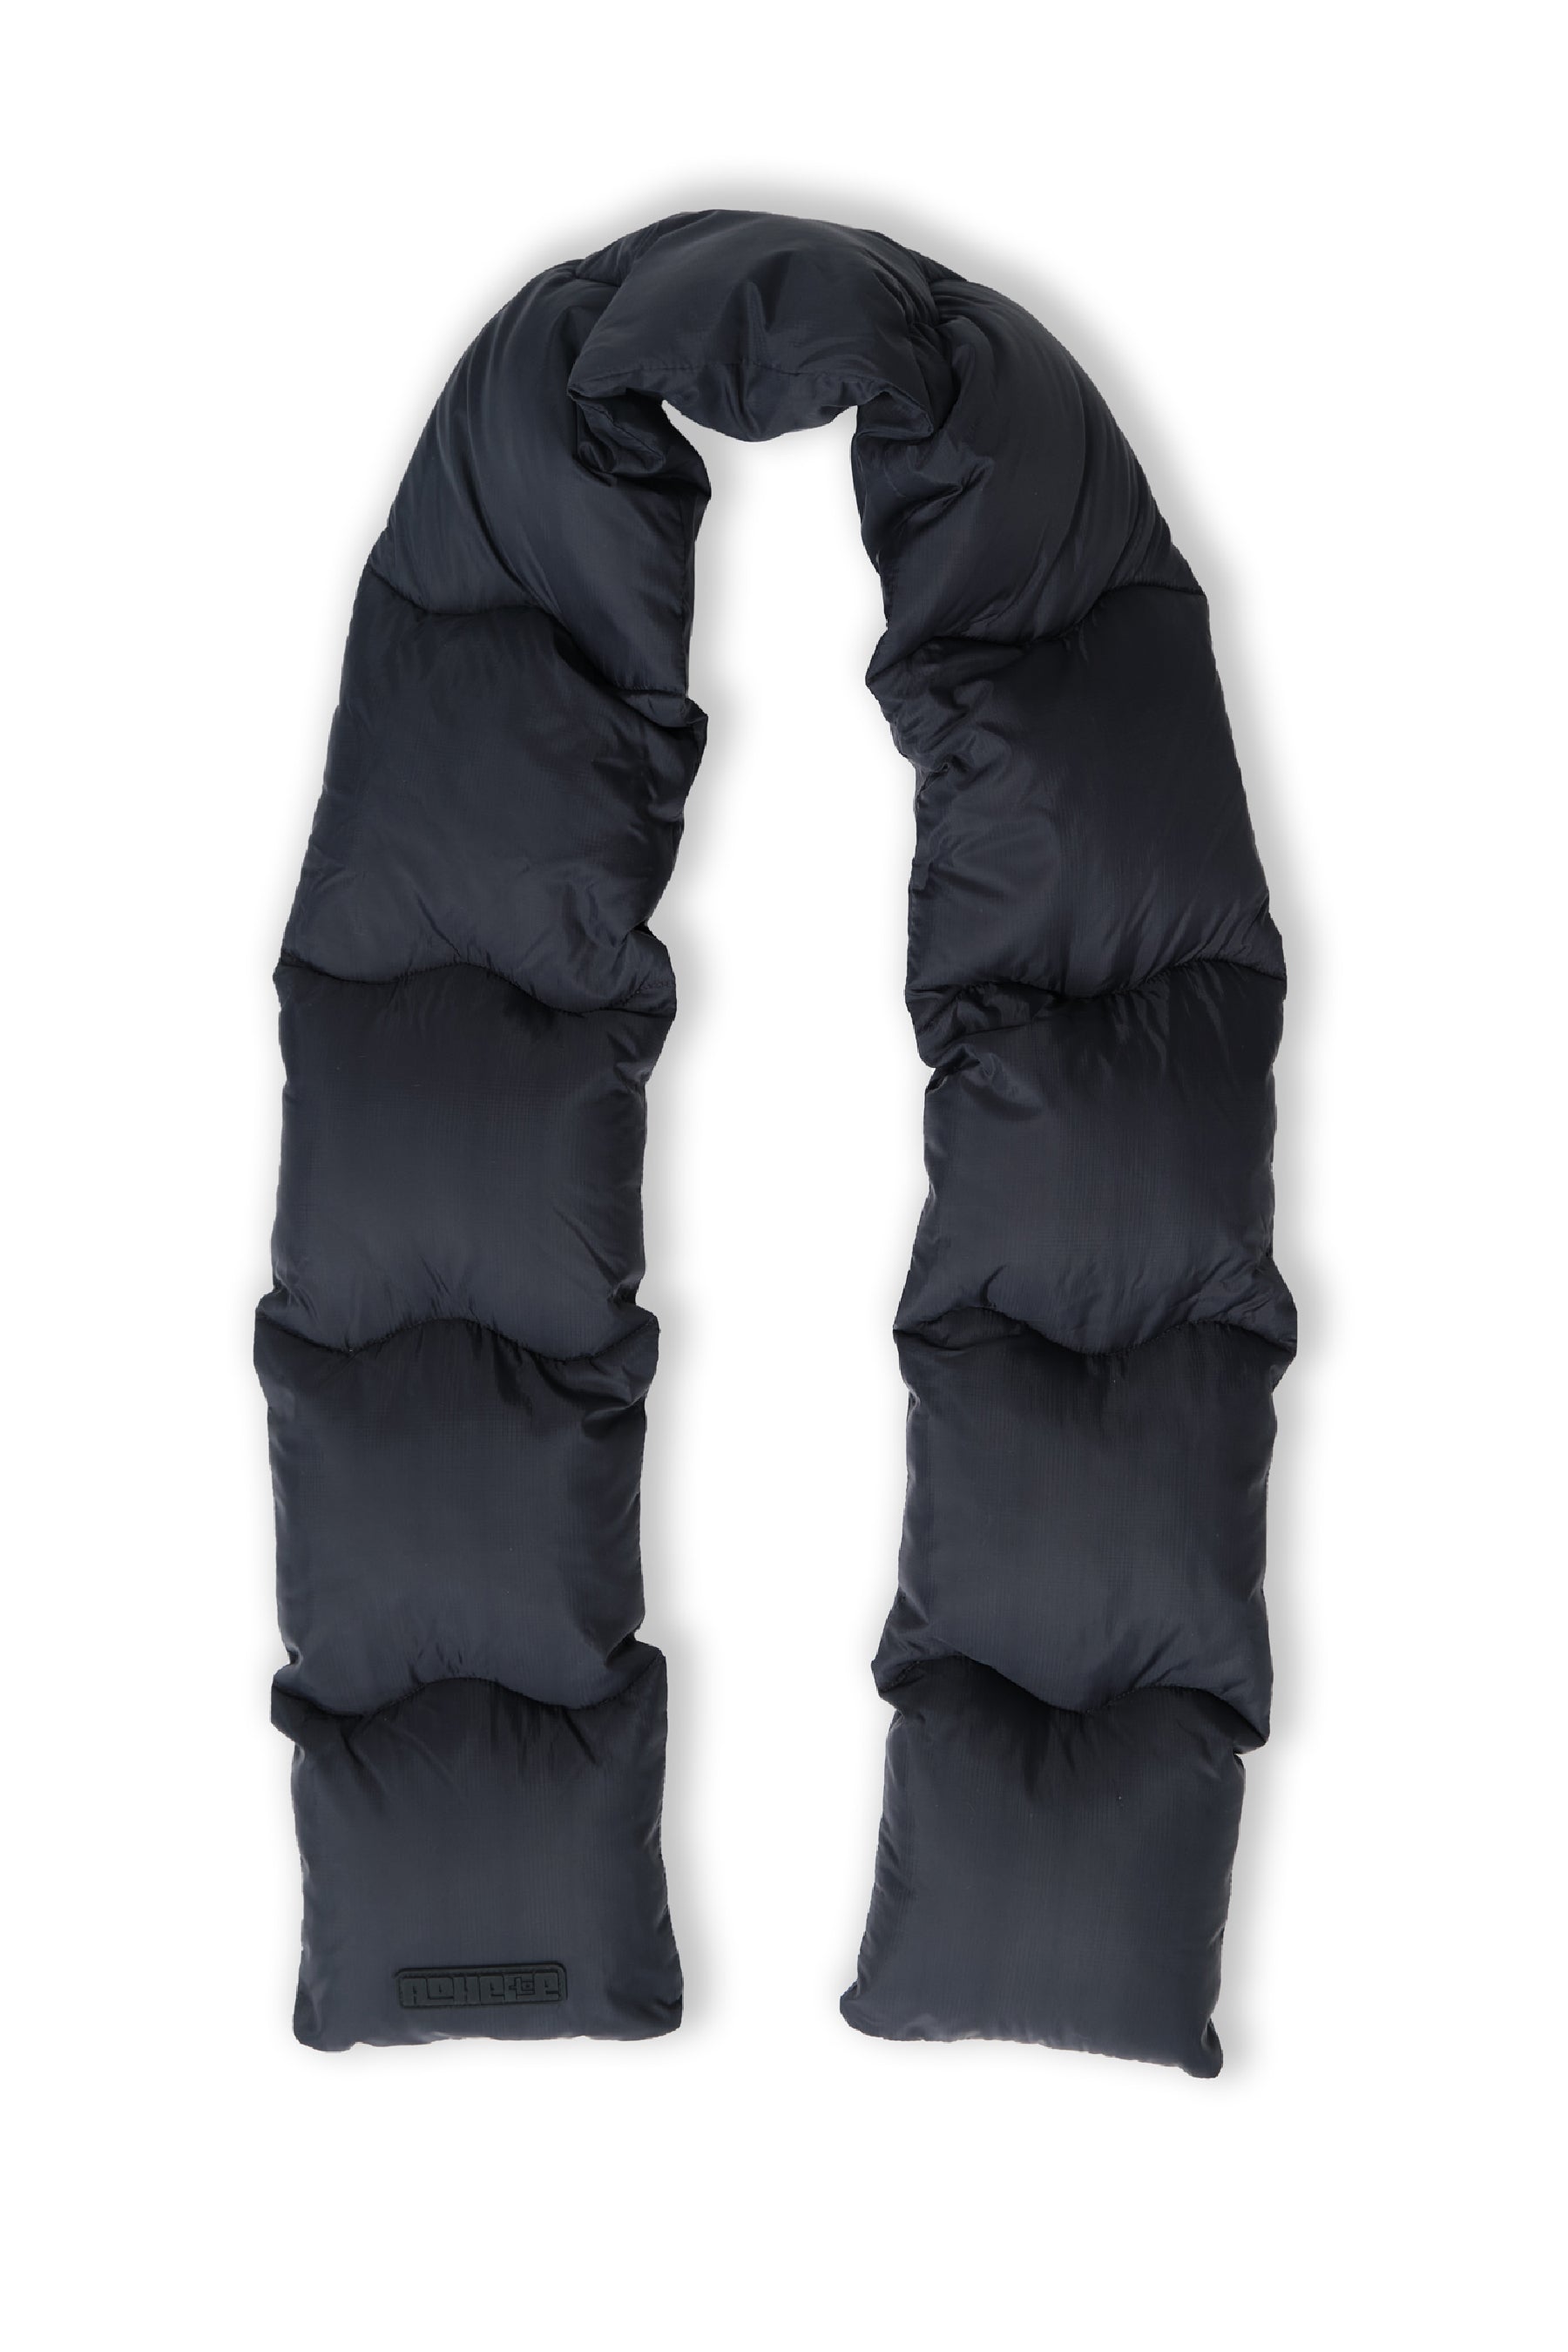  Re:Down® Black Puffer Scarf - Adhere To  - 5